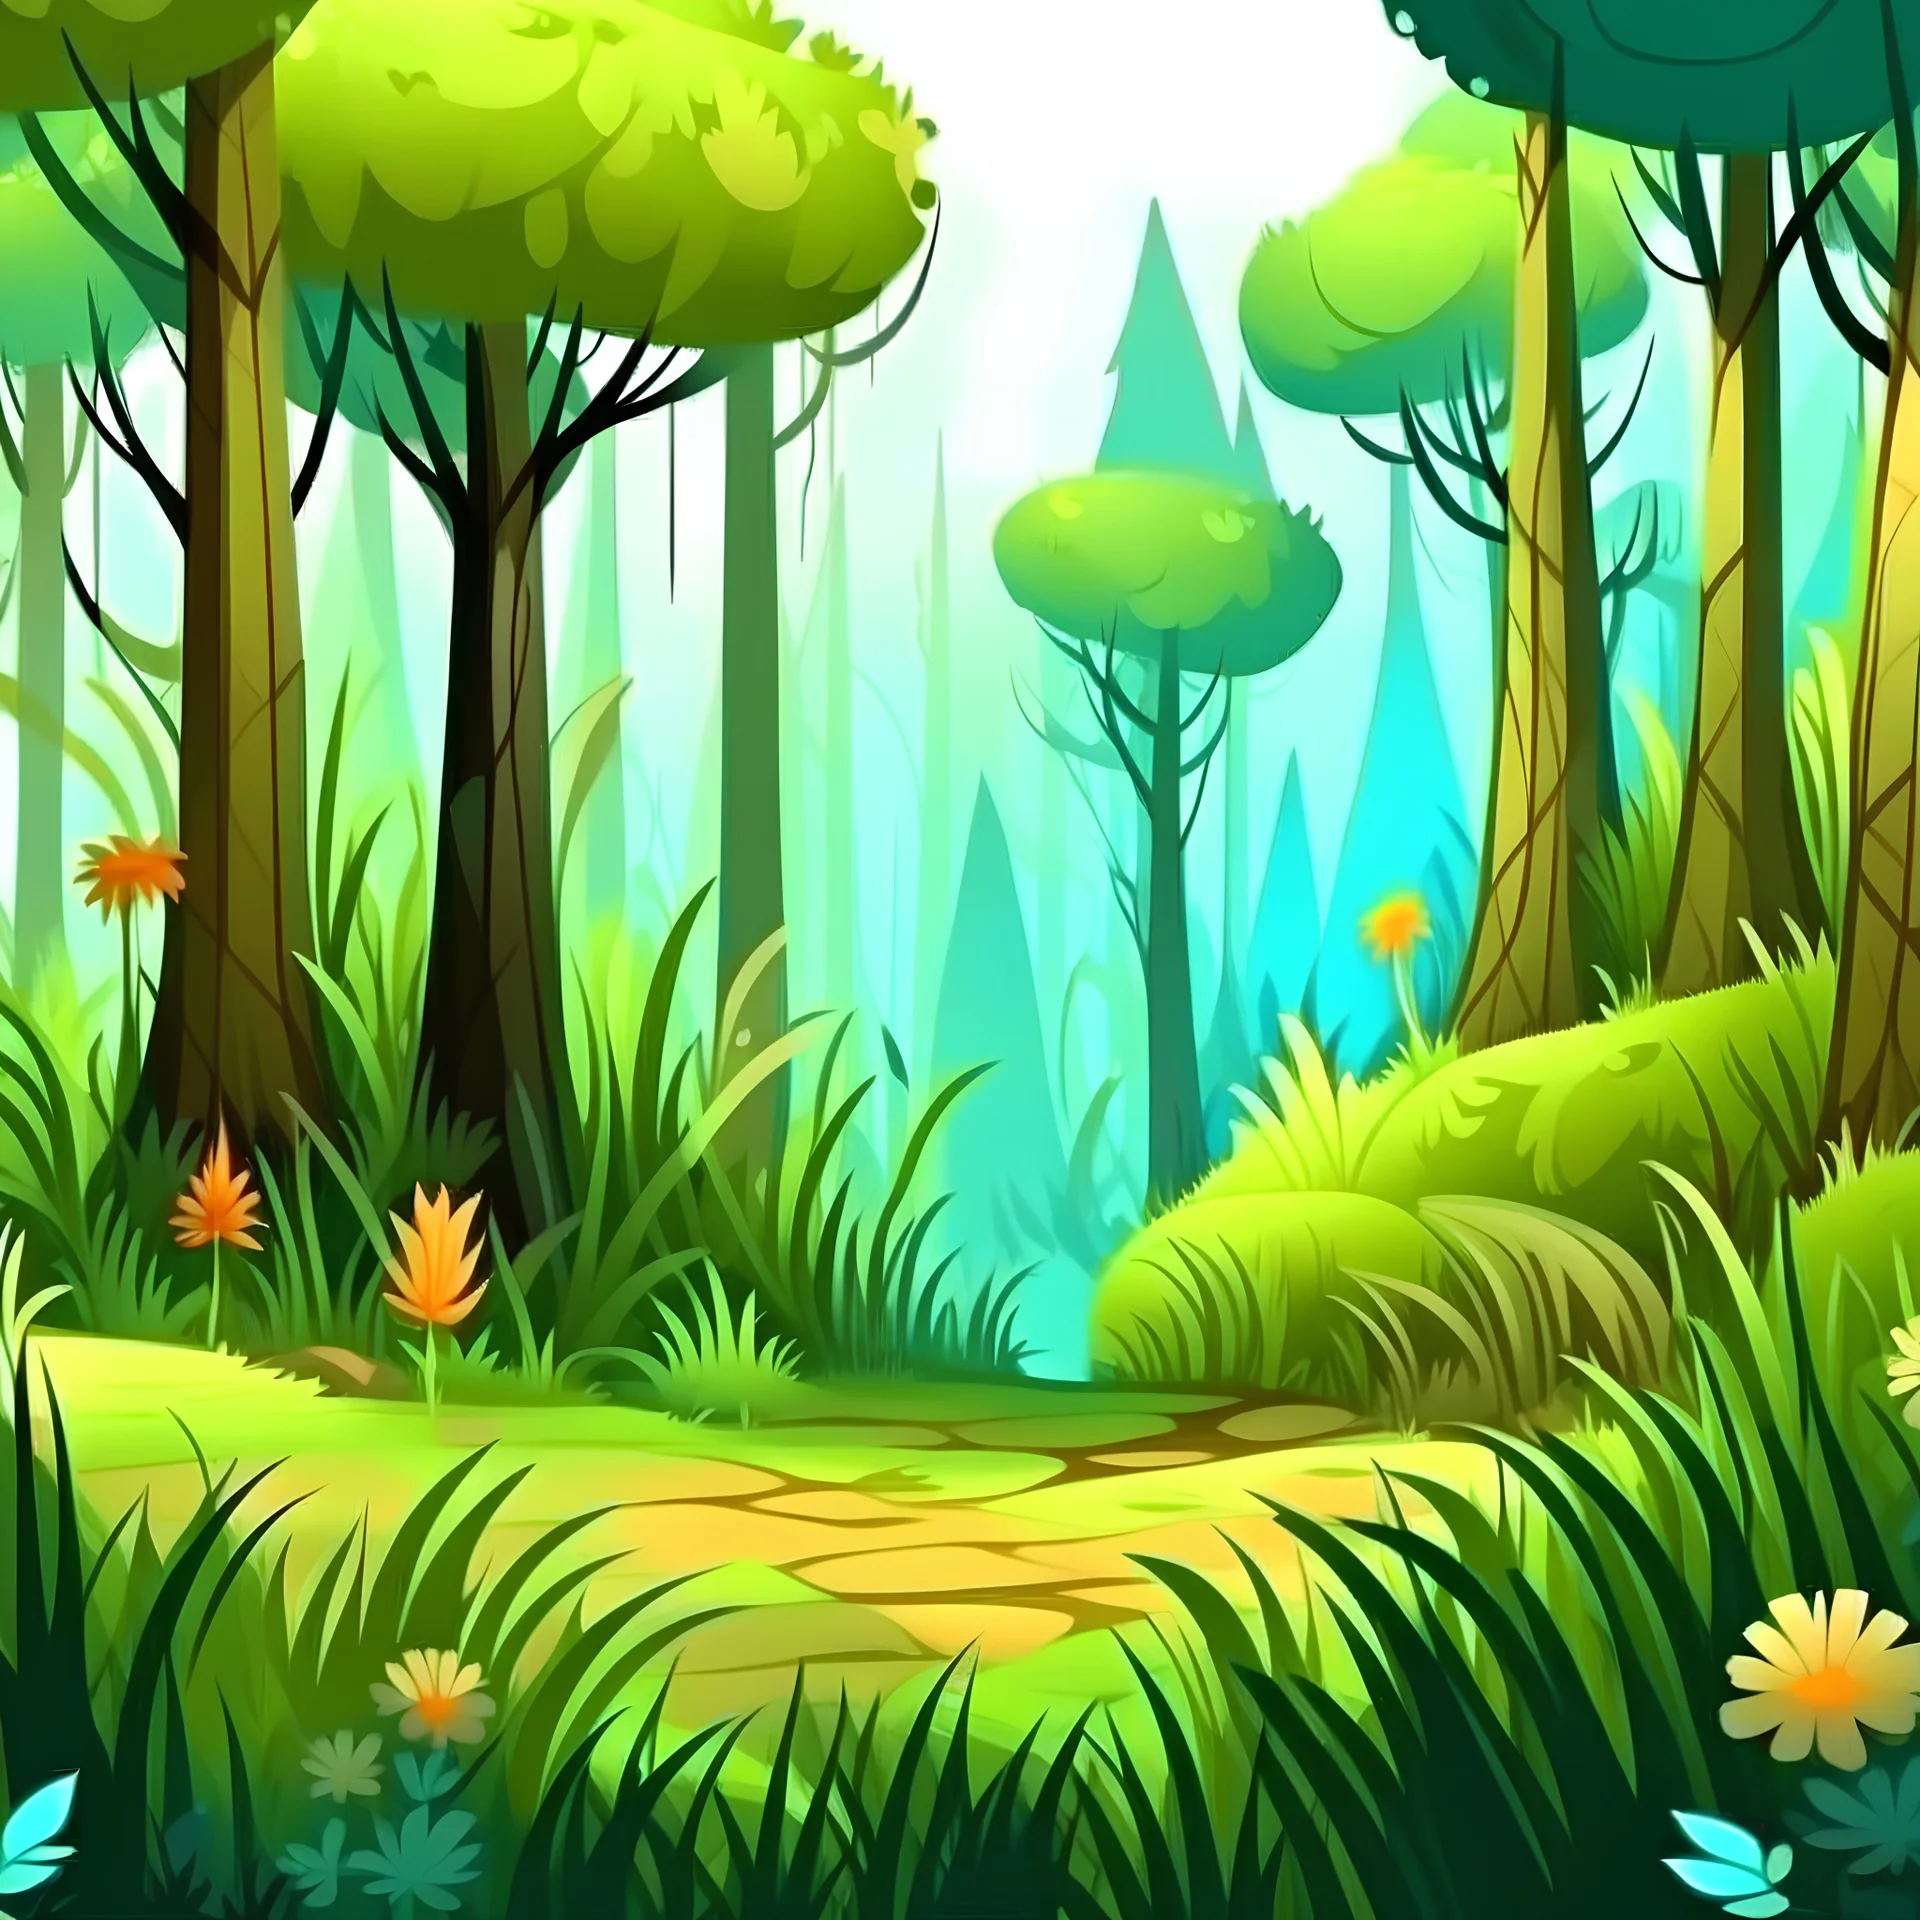 Soft cozy Fantasy cartoon forest with tall grass